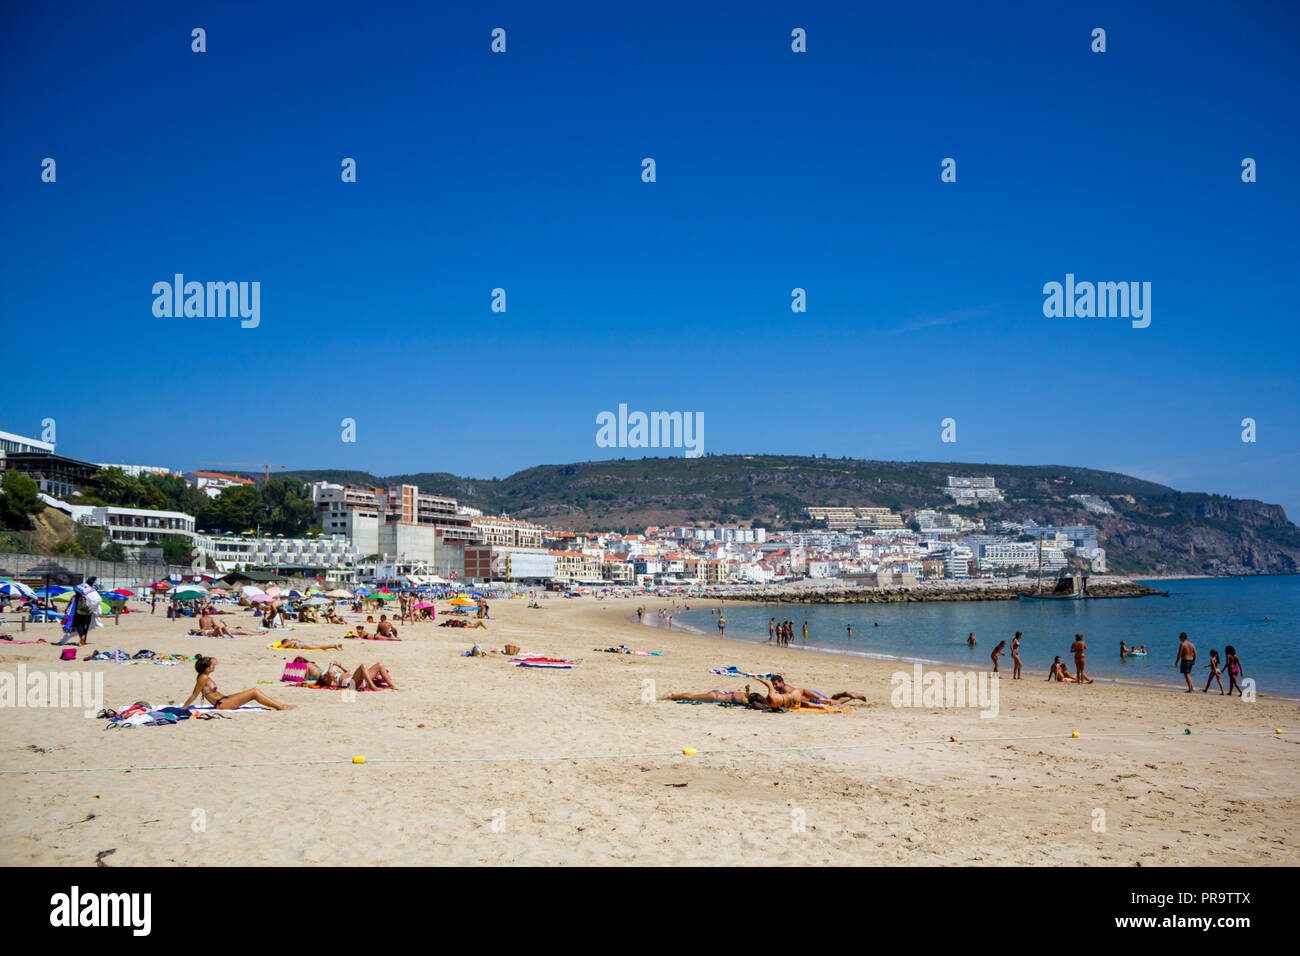 SESIMBRA, PORTUGAL - CIRCA SEPTEMBER, 2018: People on the beach with village on the background Stock Photo